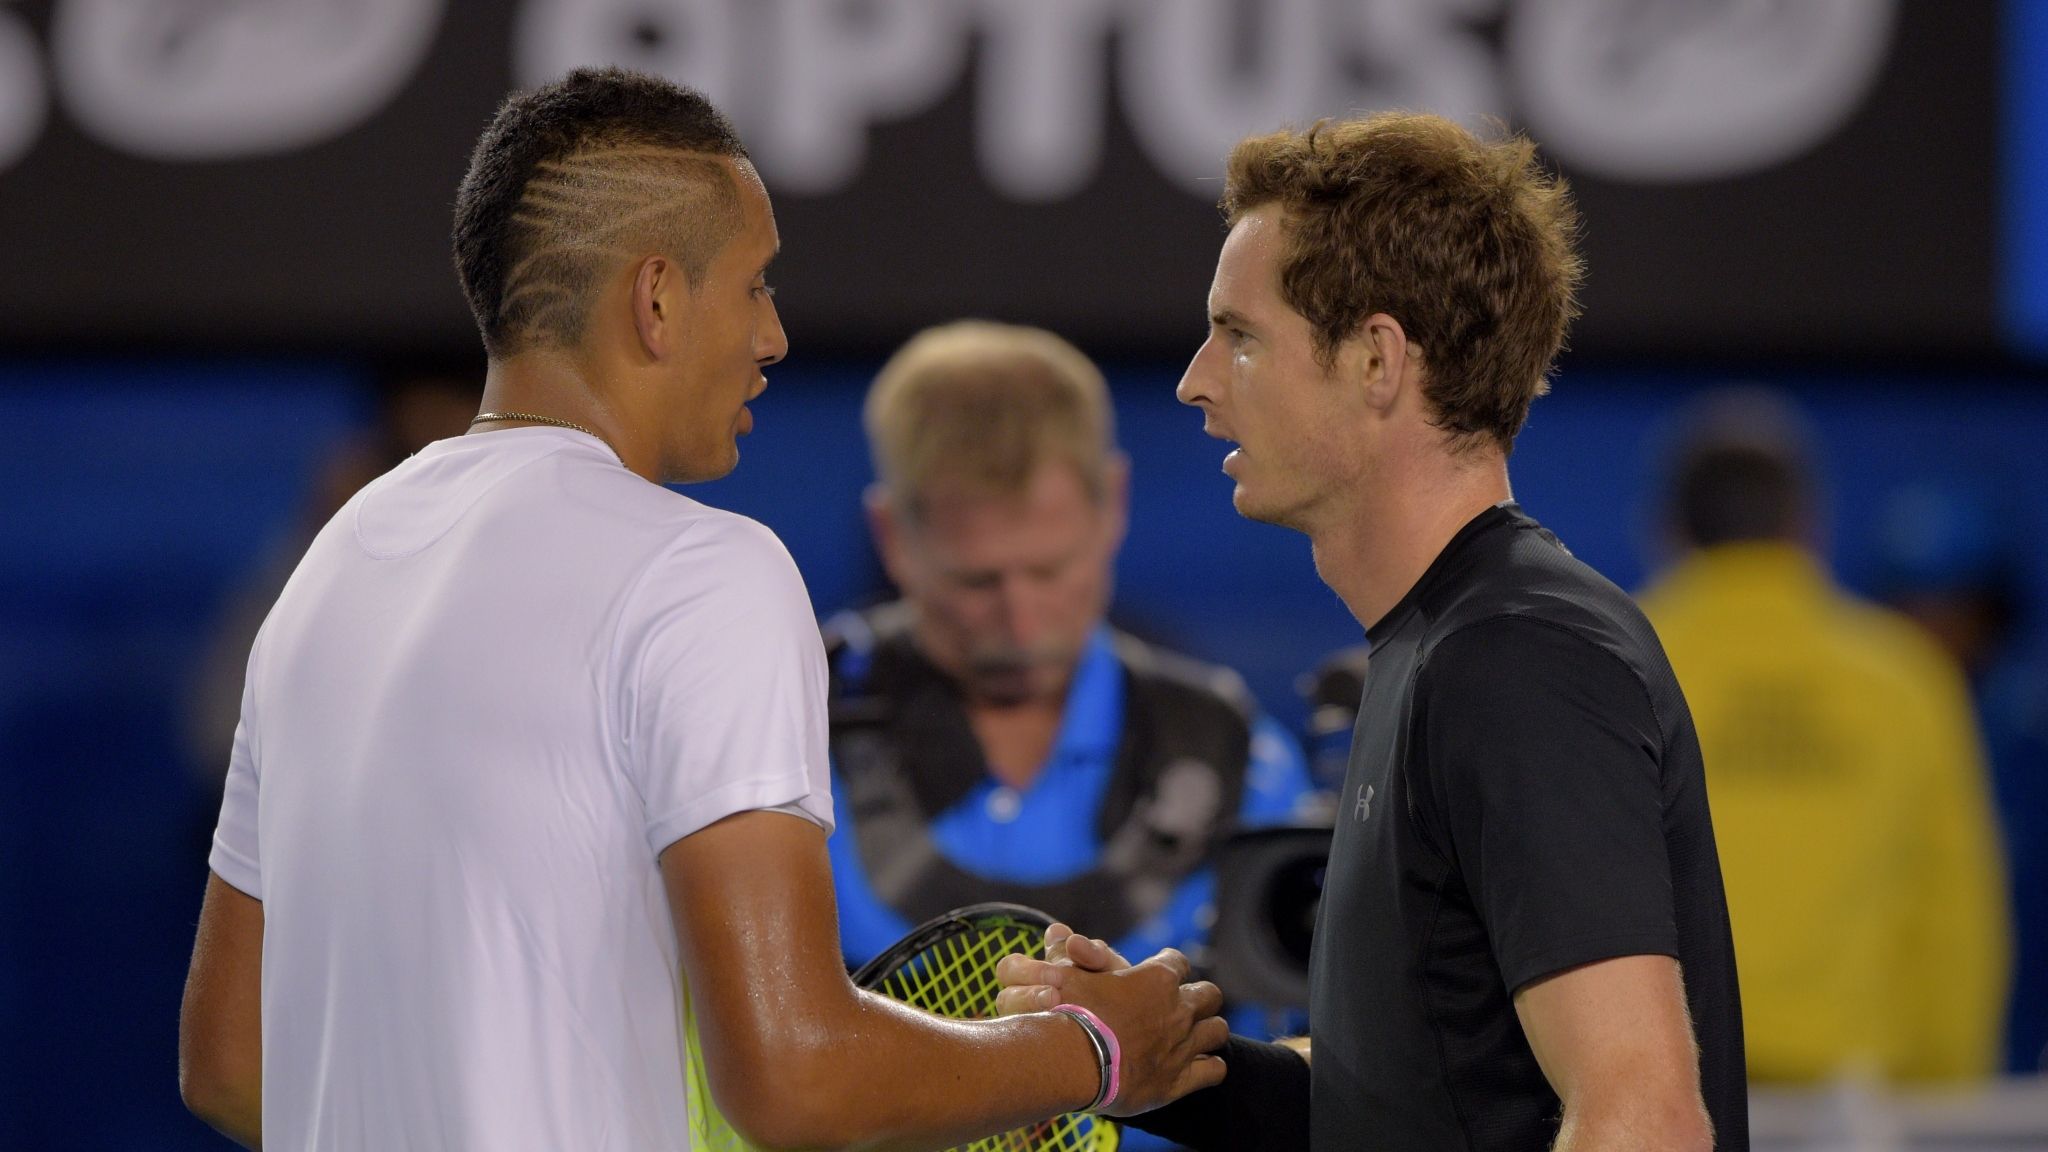 Andy Murray will take on Nick Kyrgios in a high-profile US Open first-round clash Tennis News Sky Sports